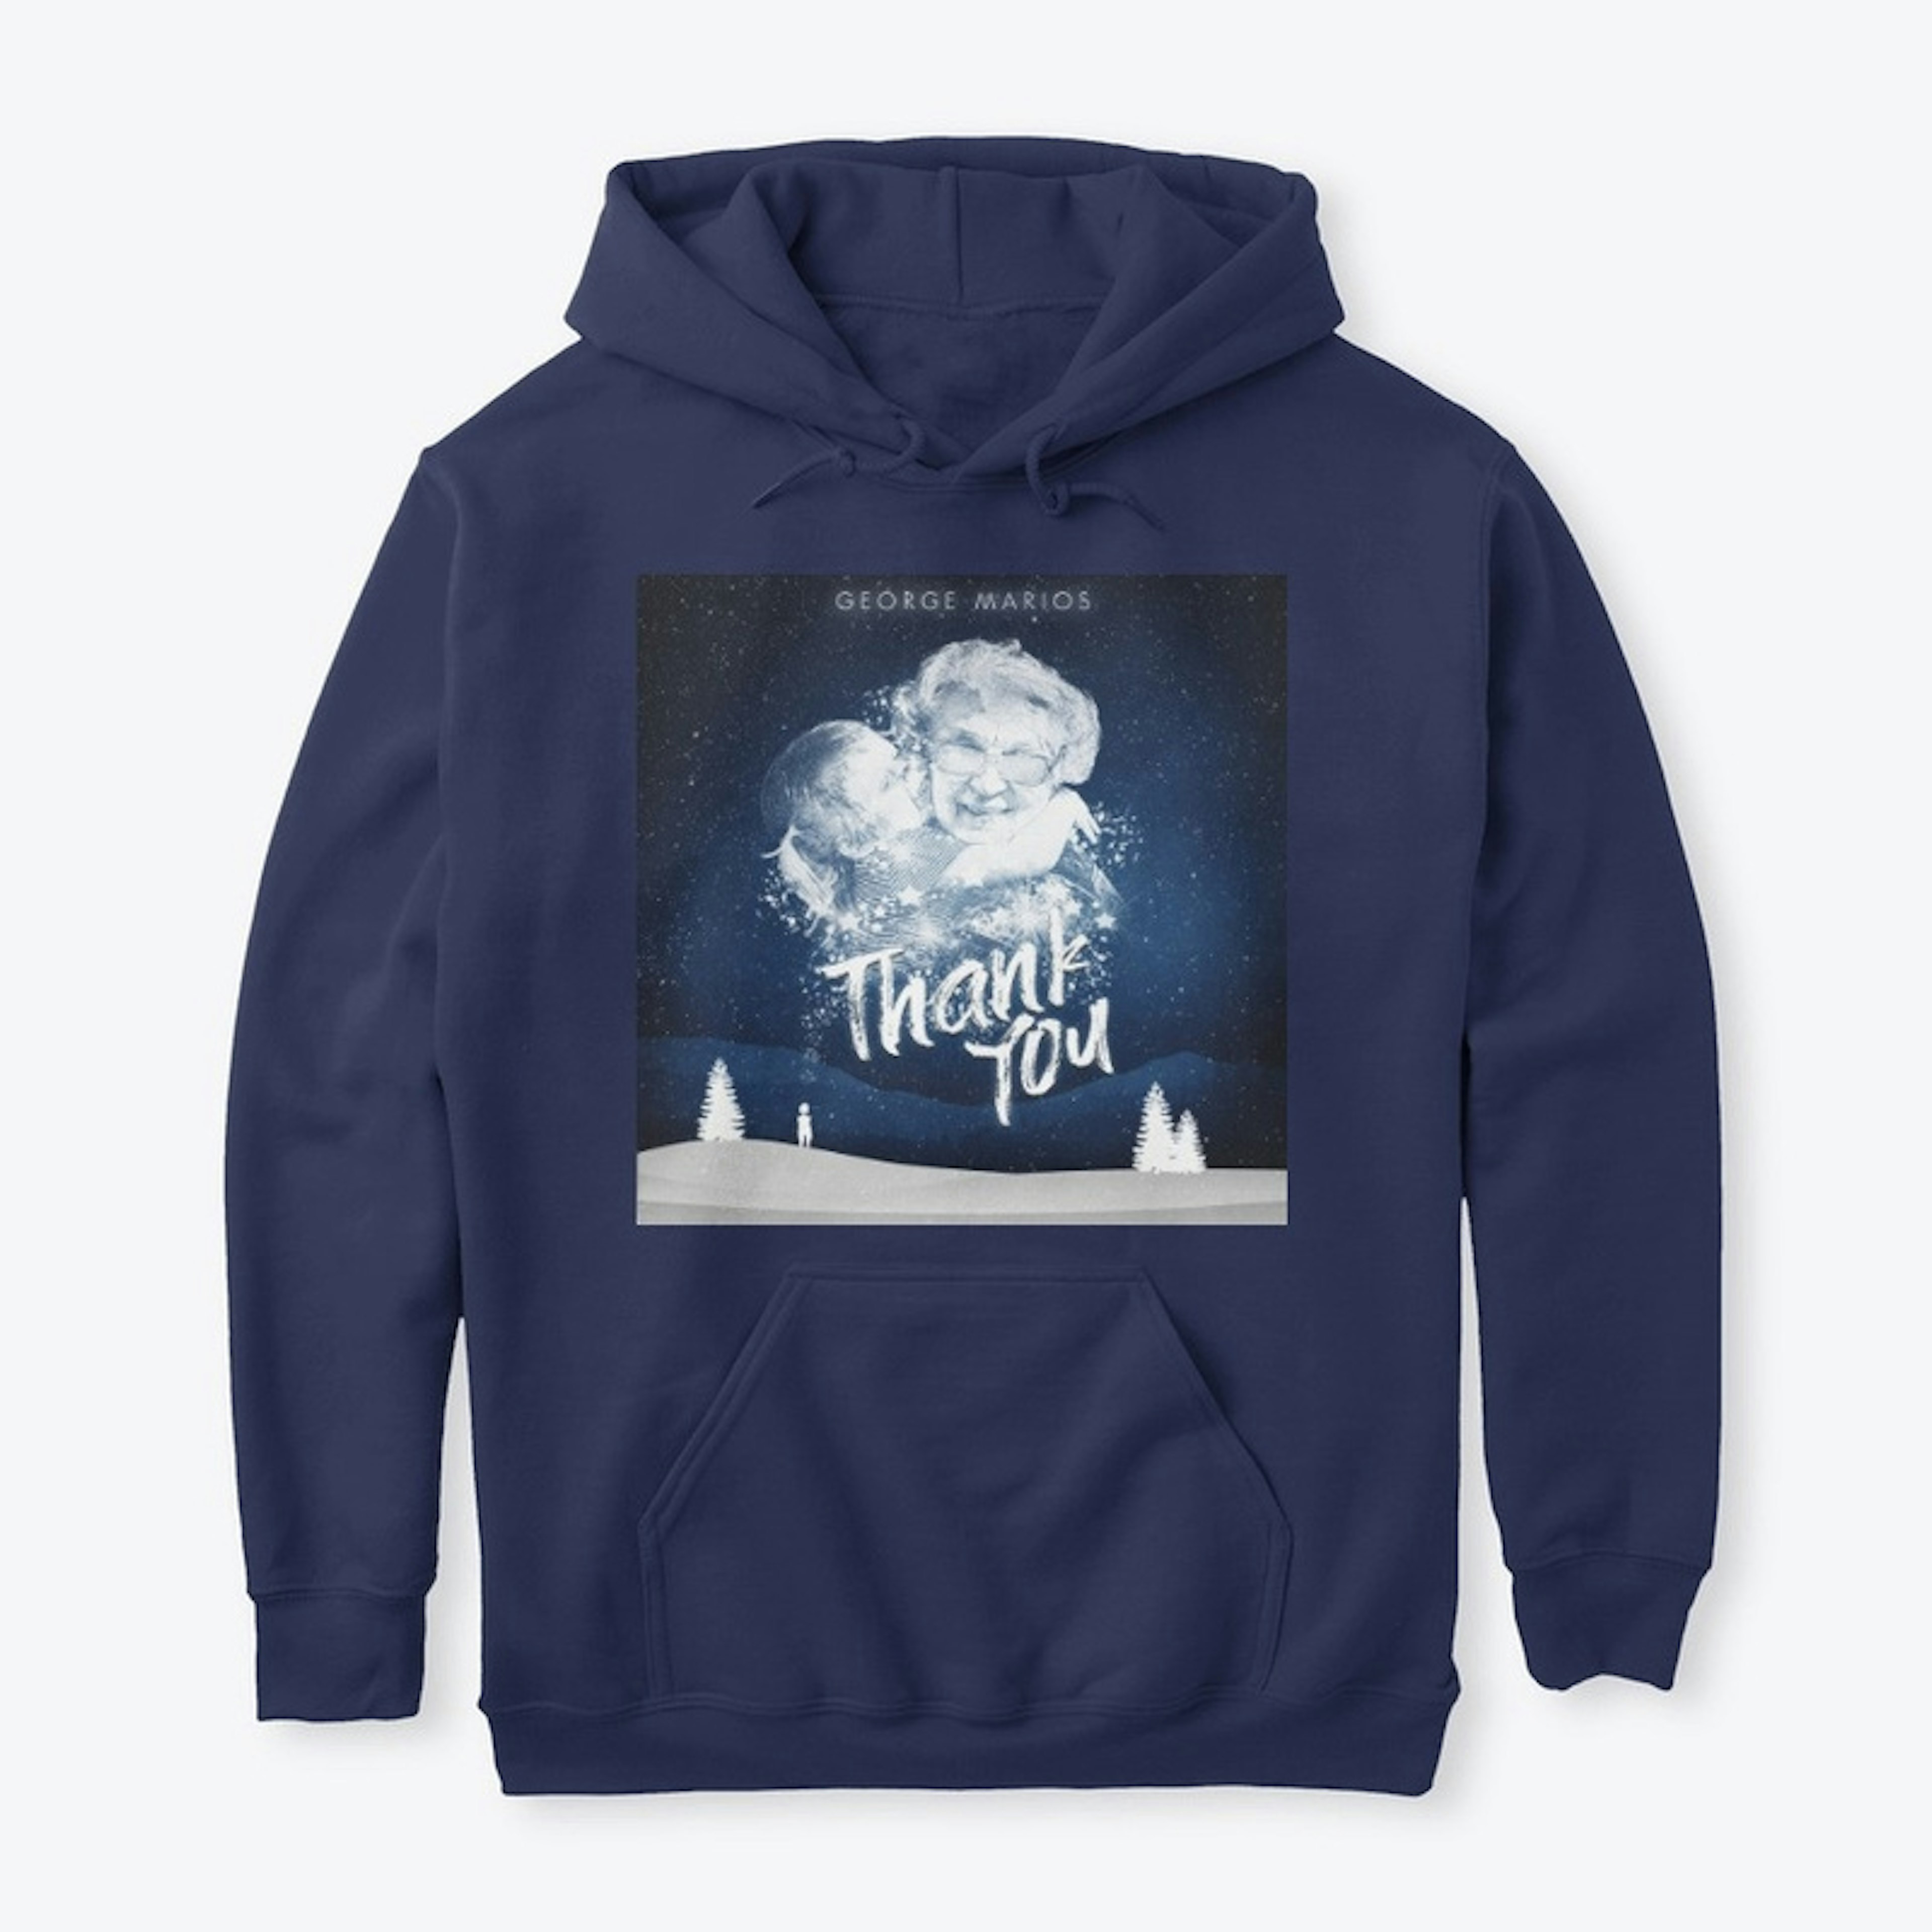 "Thank You" Hoodie